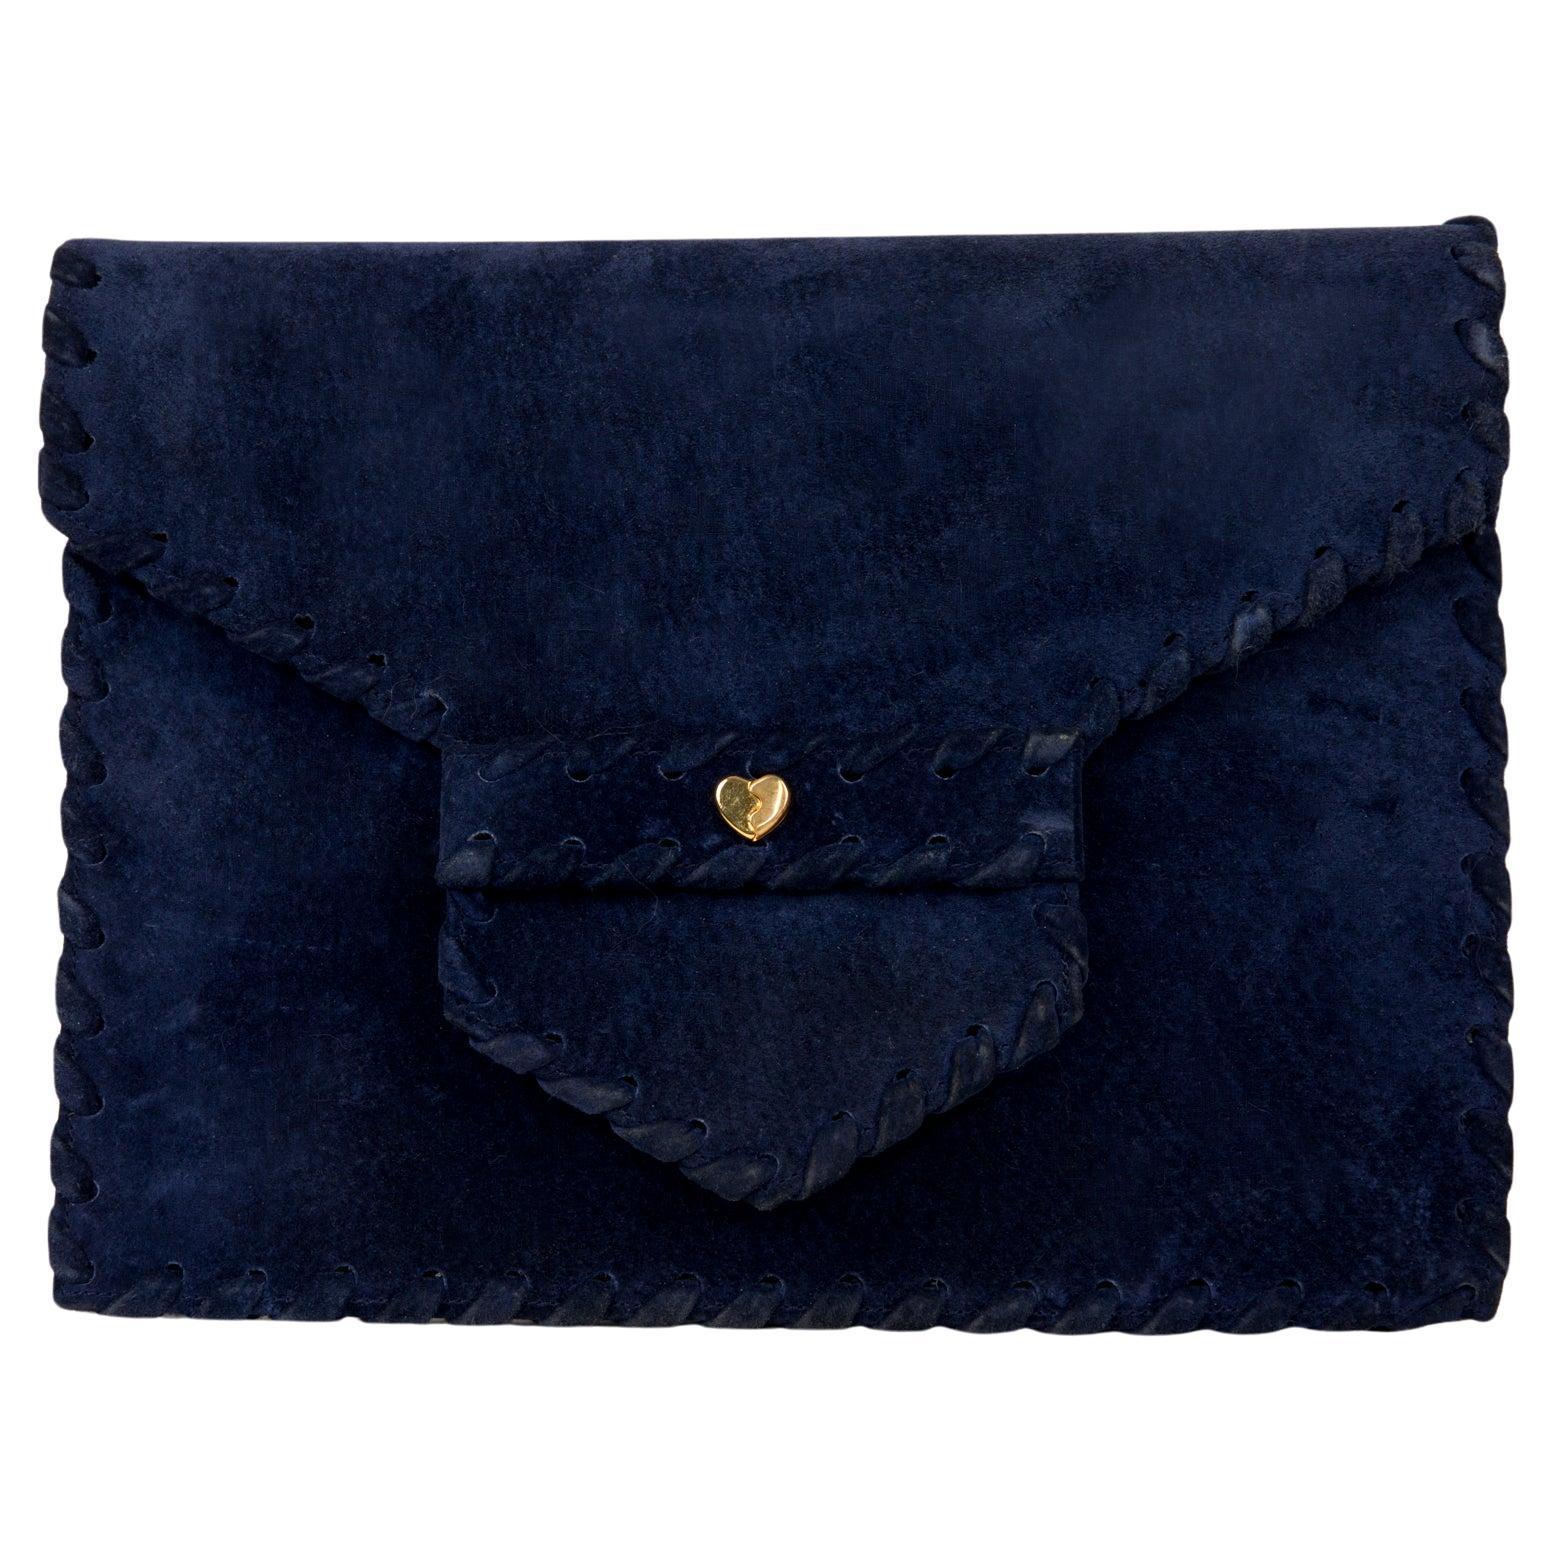 Sepcoeur Blue Suede Leather Large Clutch Bag 